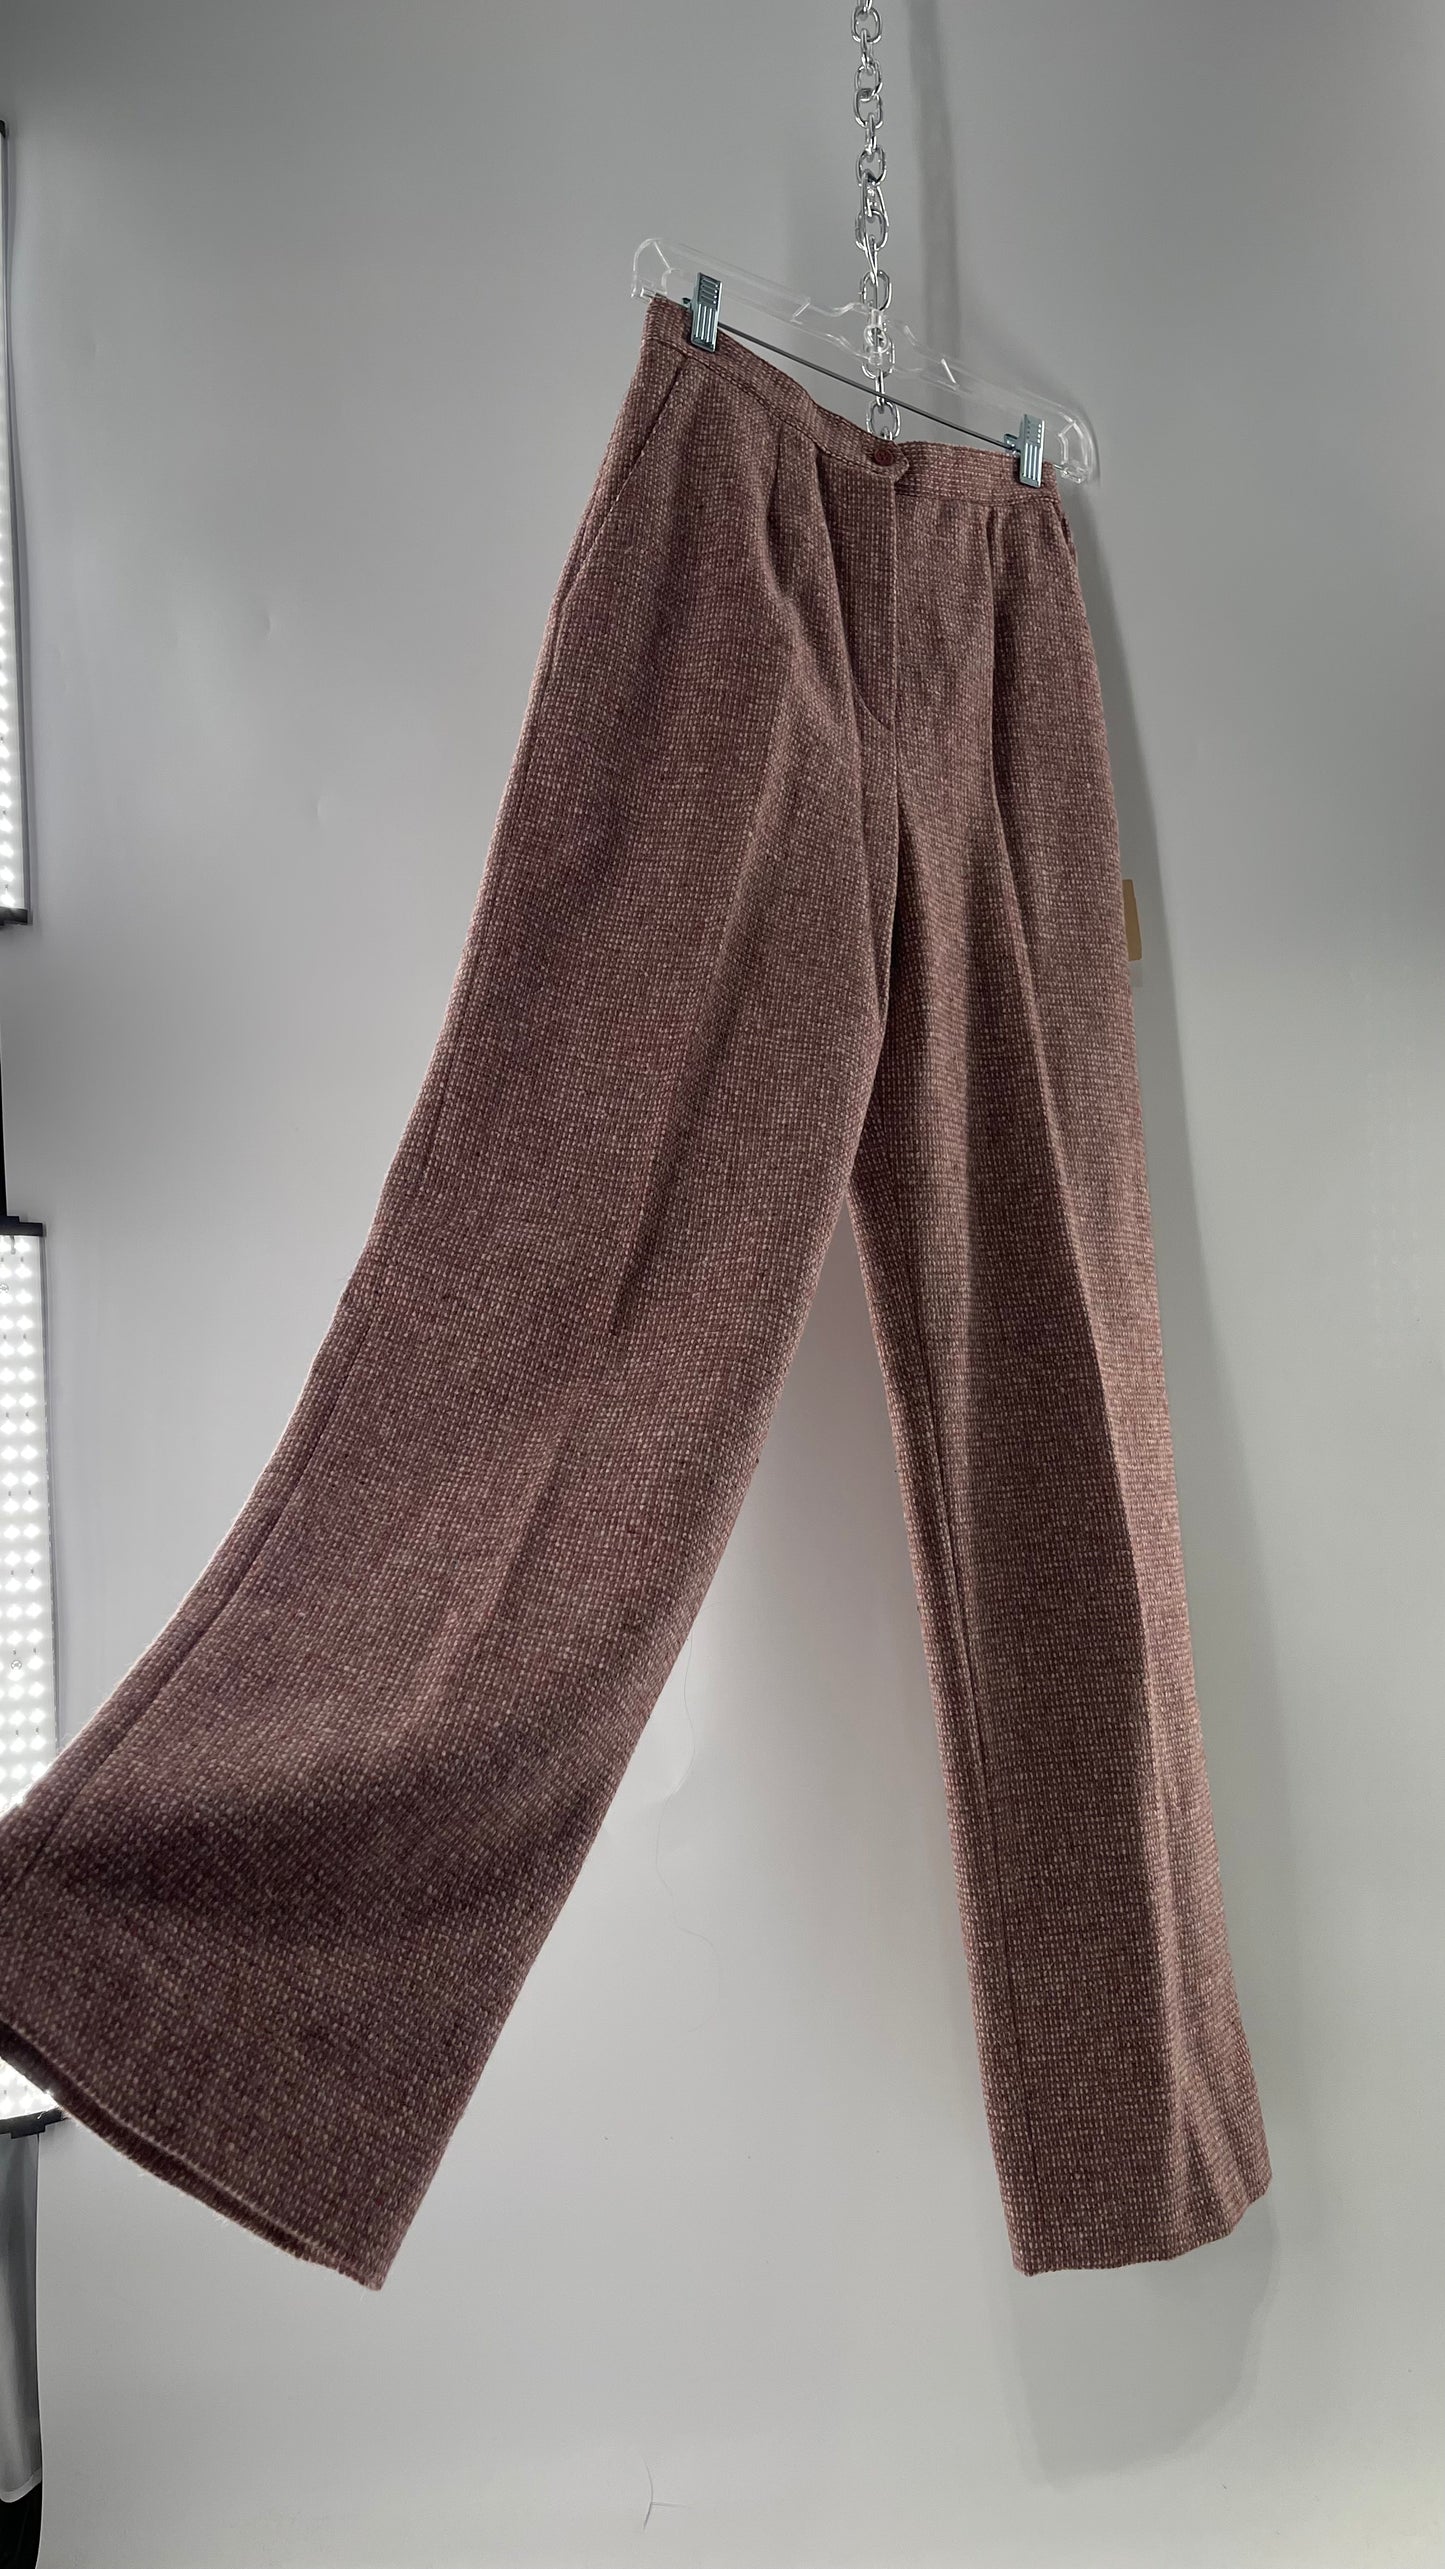 Deadstock Tanner Tweed Sport Vintage Pink Wool Trouser with Tags Attached (8)